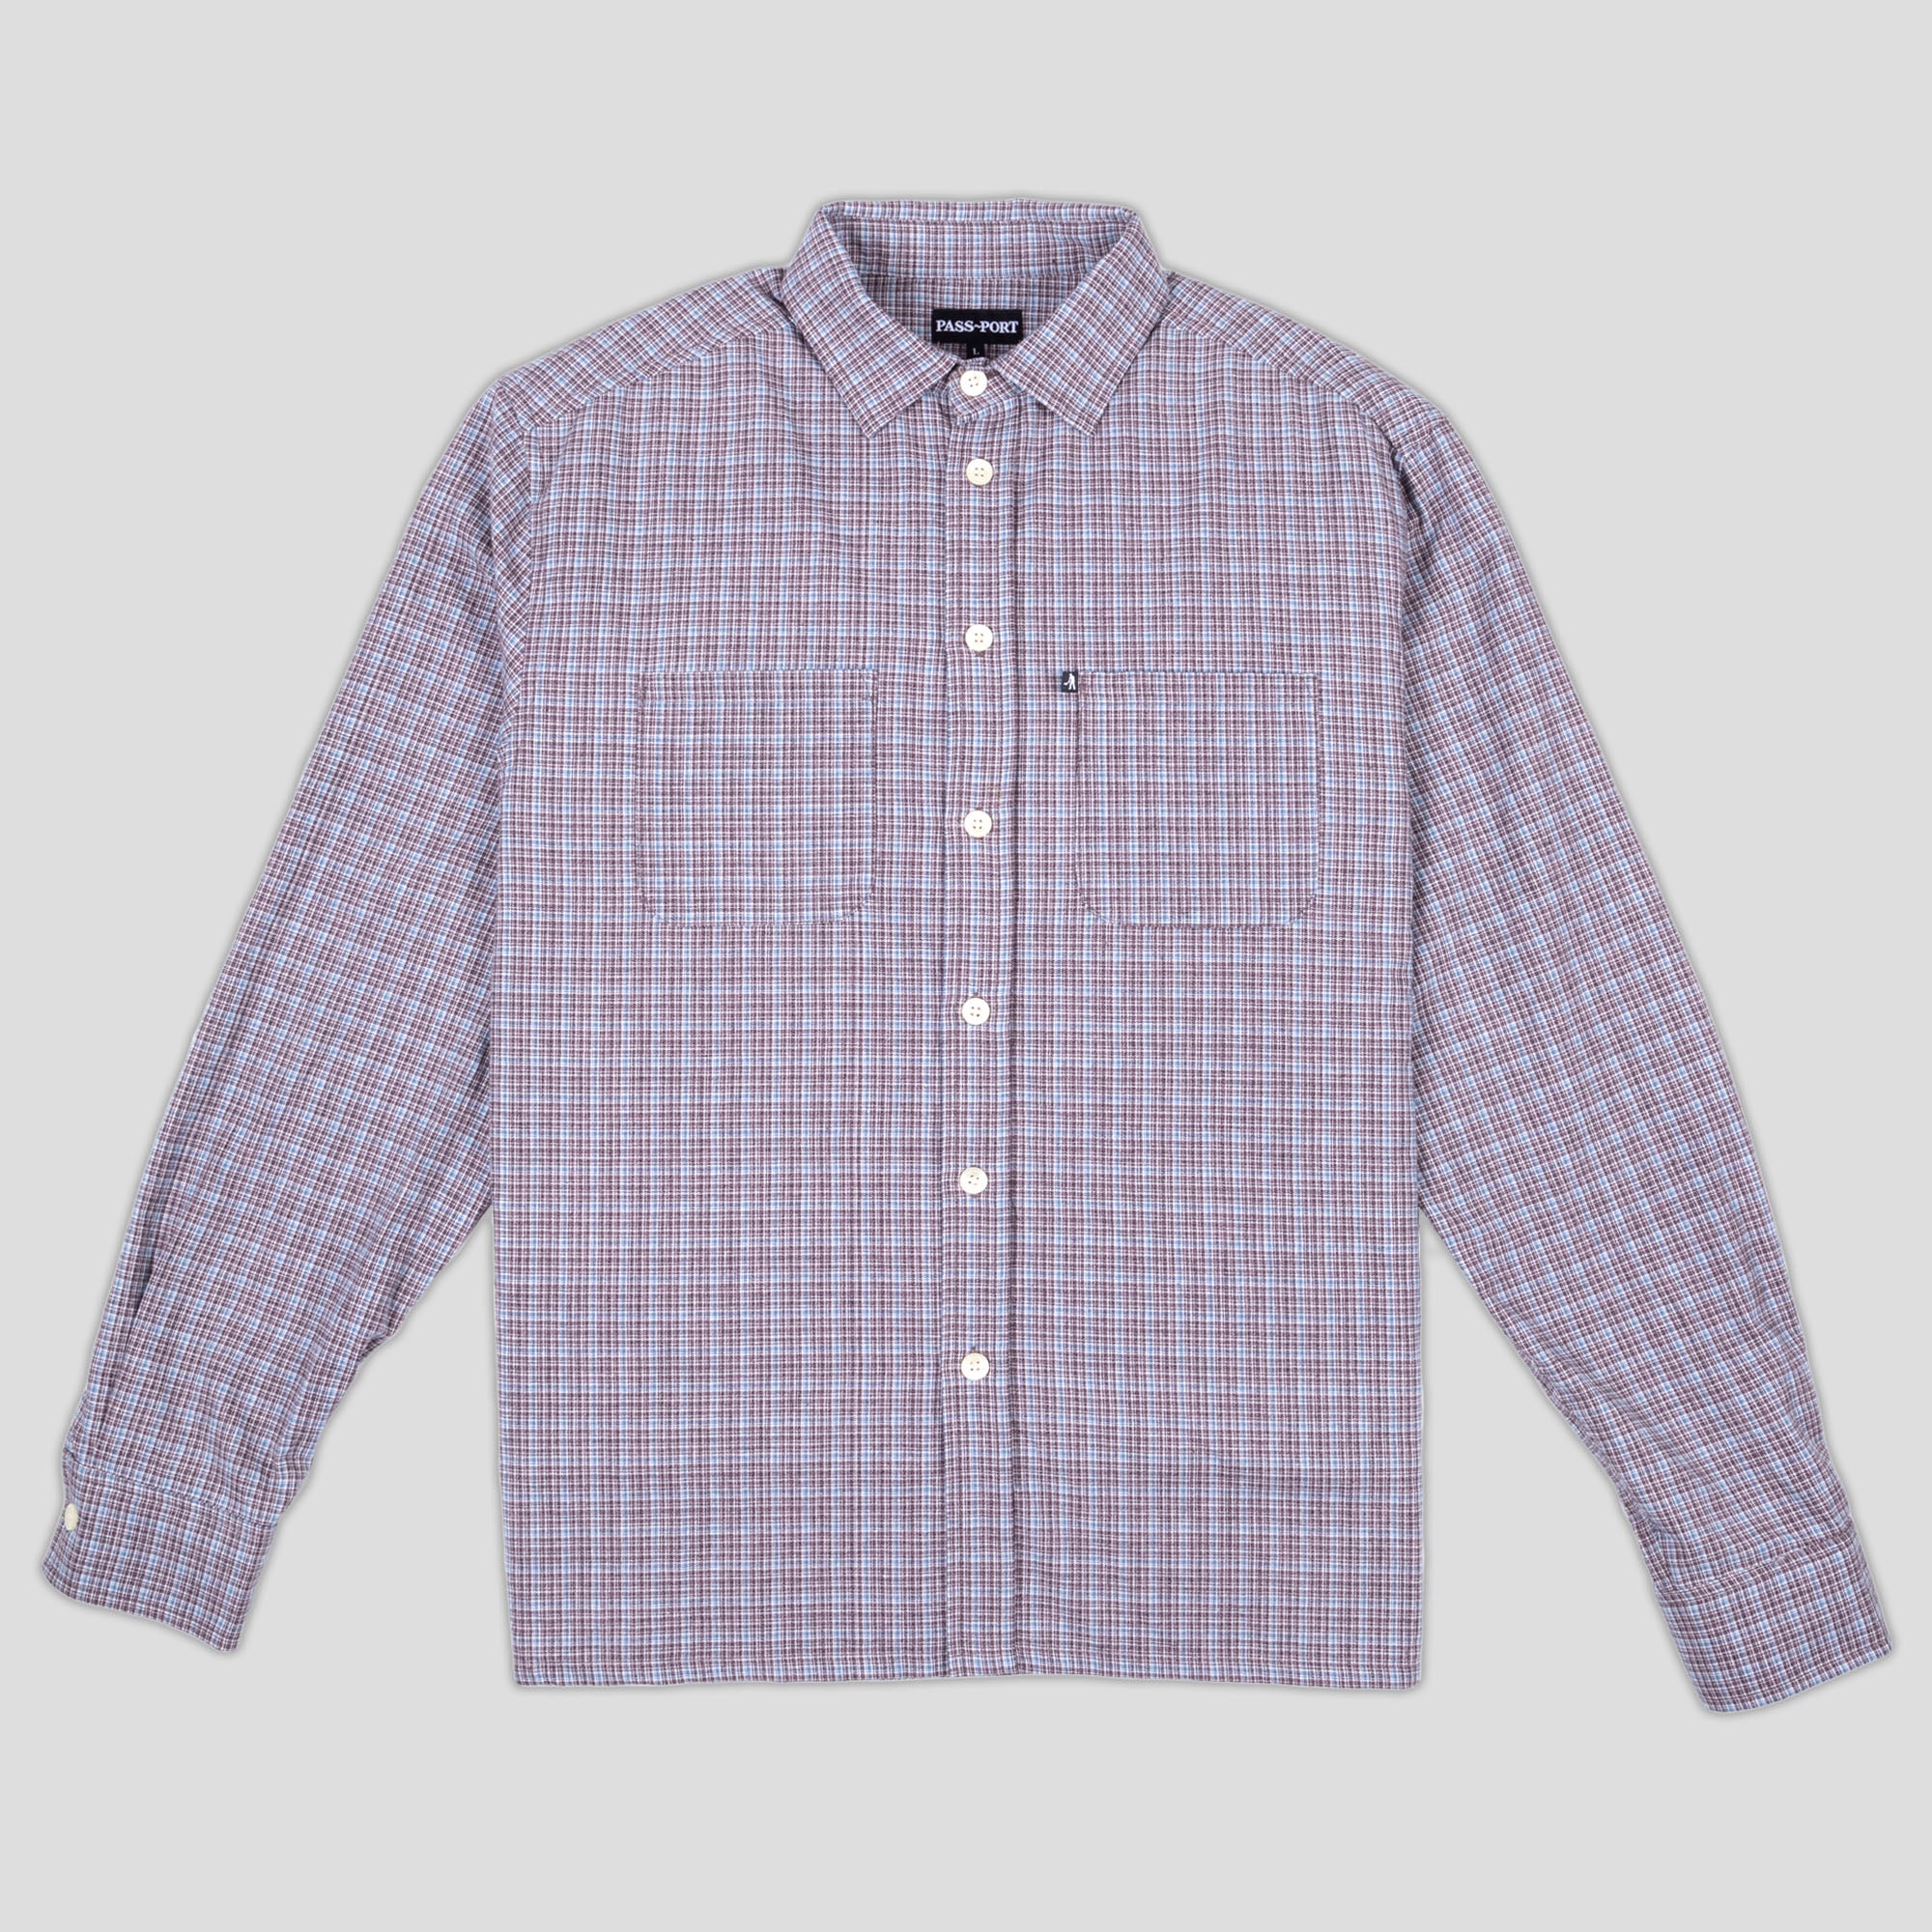 Pass~Port Workers Check Long-sleeve Shirt - Blue Heather